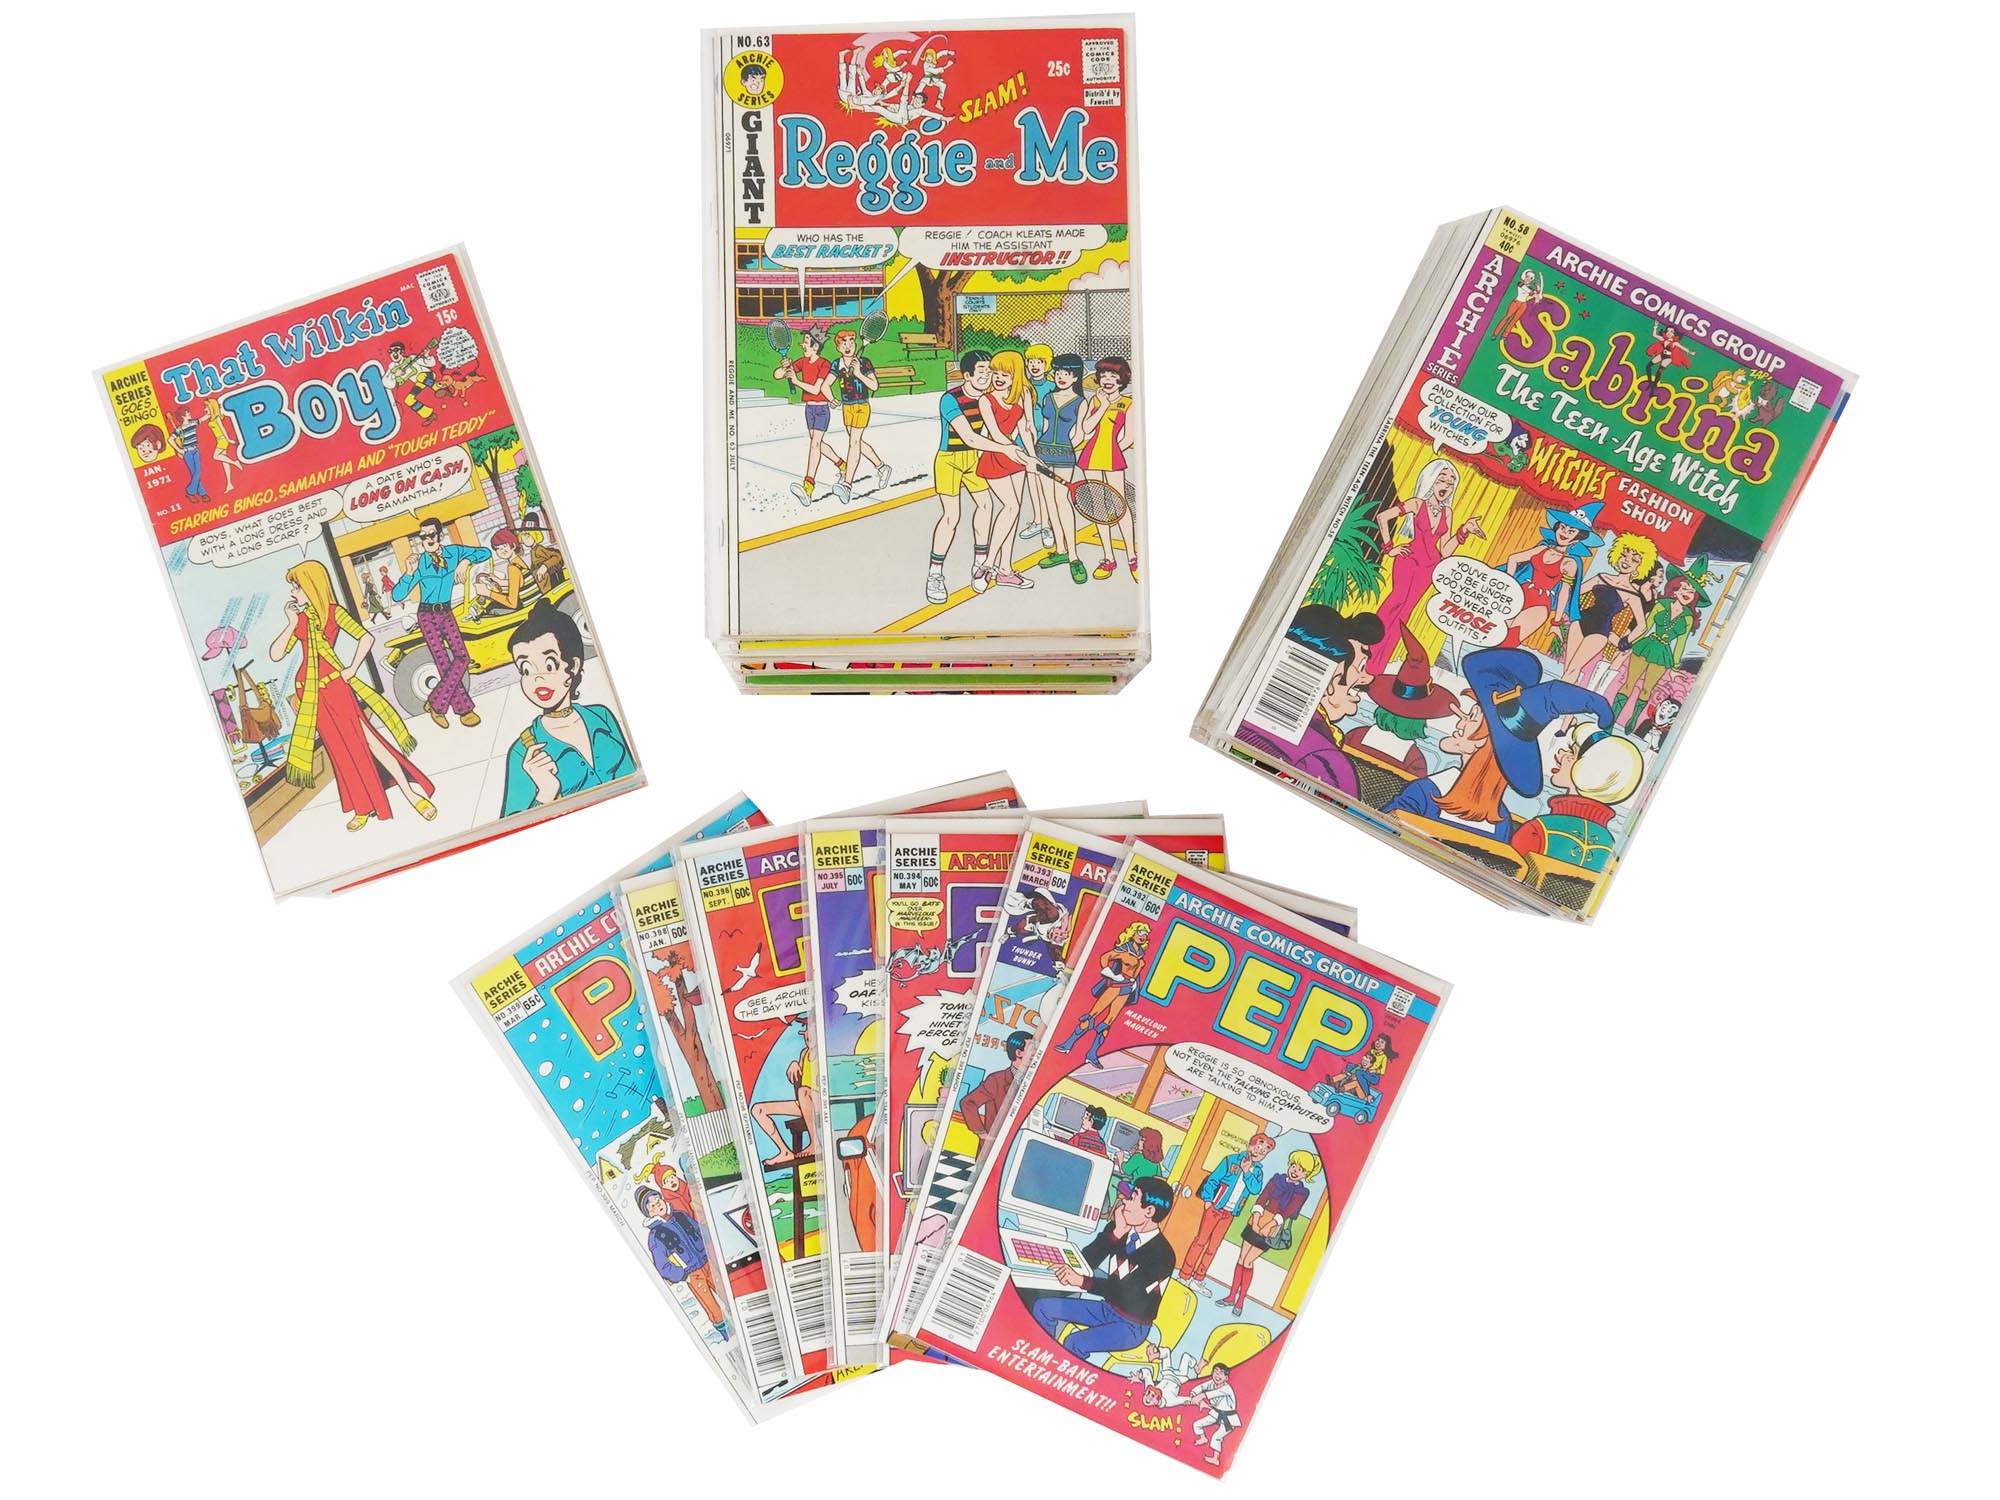 LARGE COLLECTION OF ARCHIE ILLUSTRATION COMICS BOOKS PIC-1